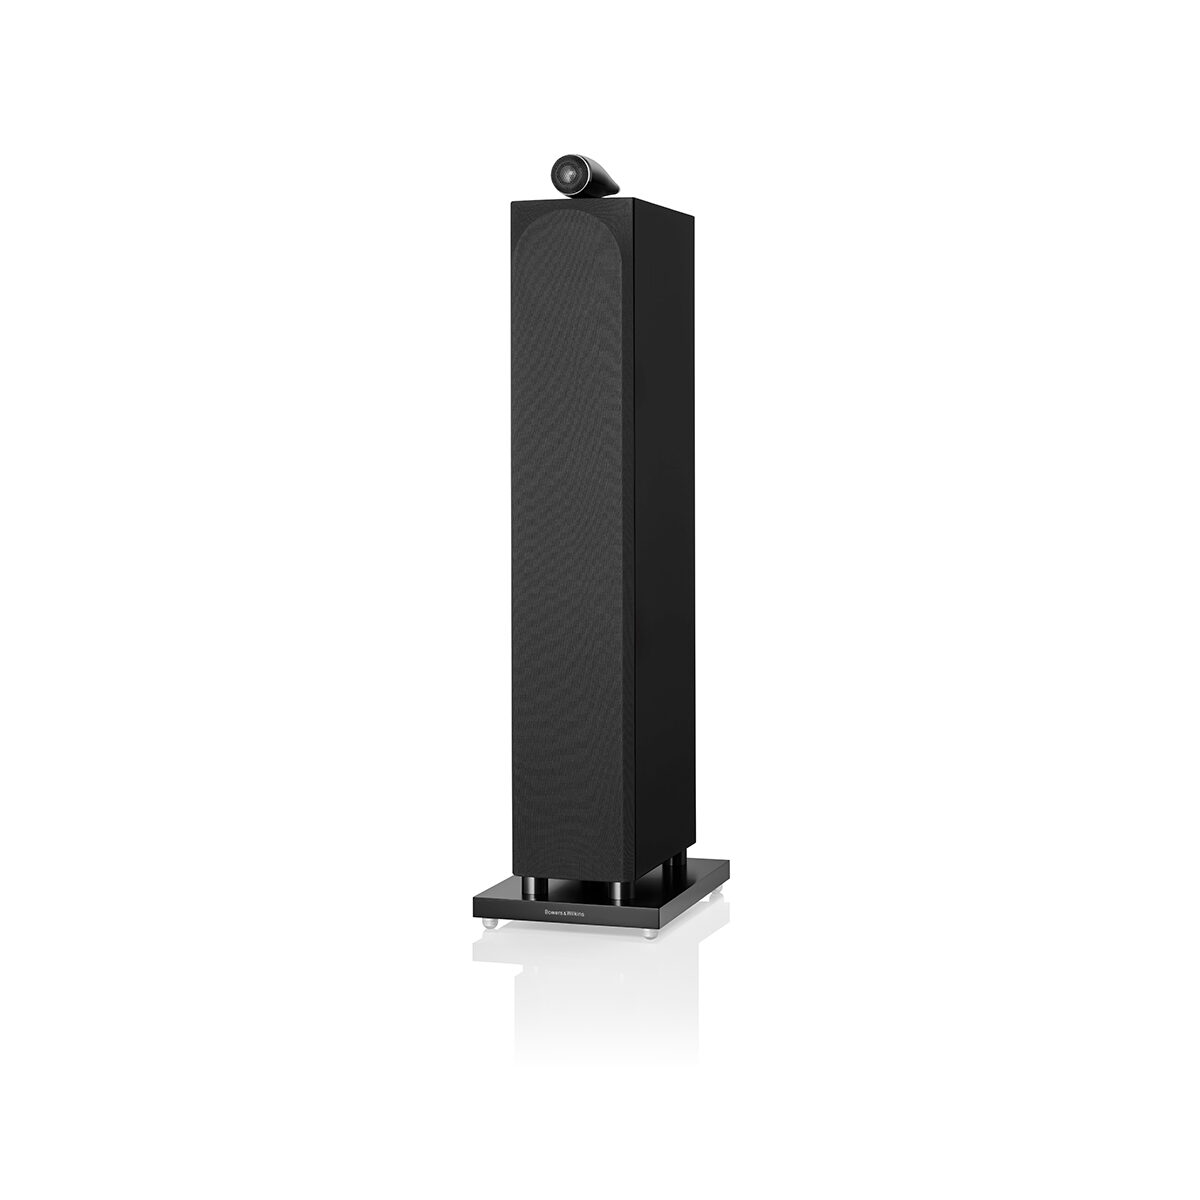 Bowers&Wilkins-702S3-Black-Cover